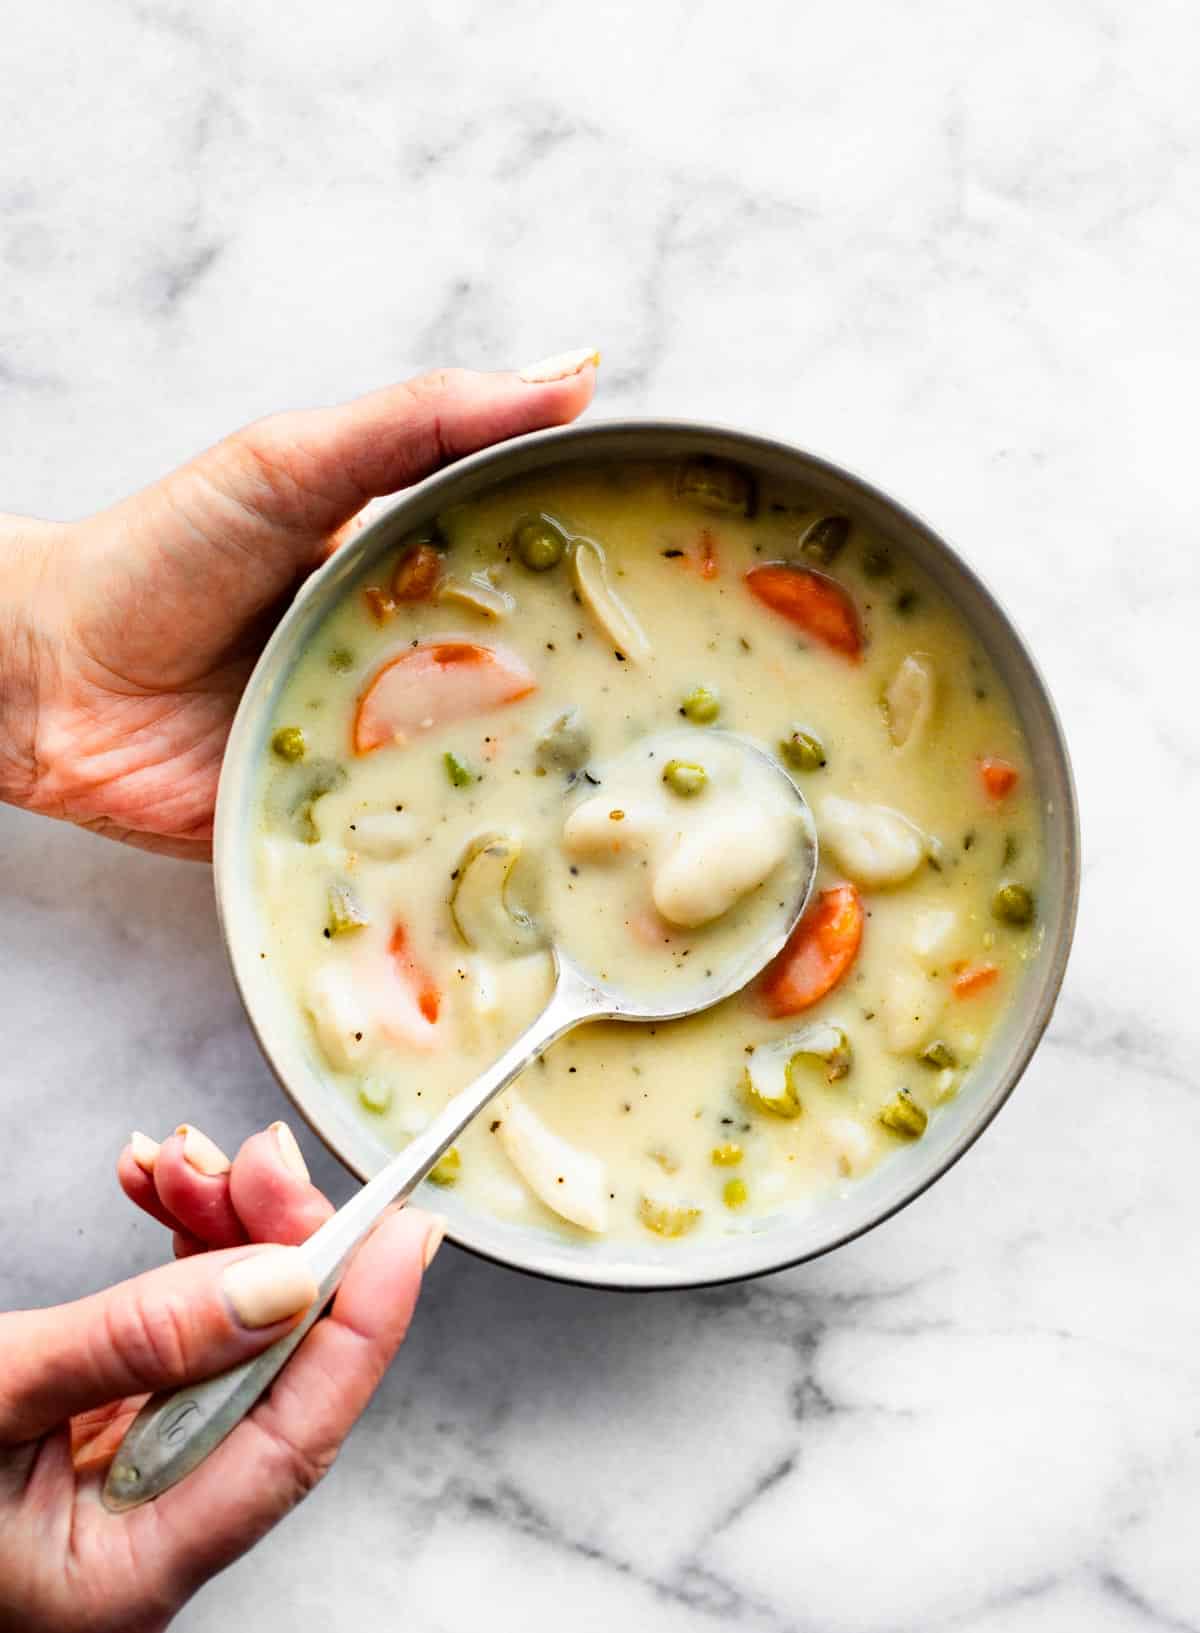 A woman's hand holding a bowl of creamy chicken and gnocchi soup.